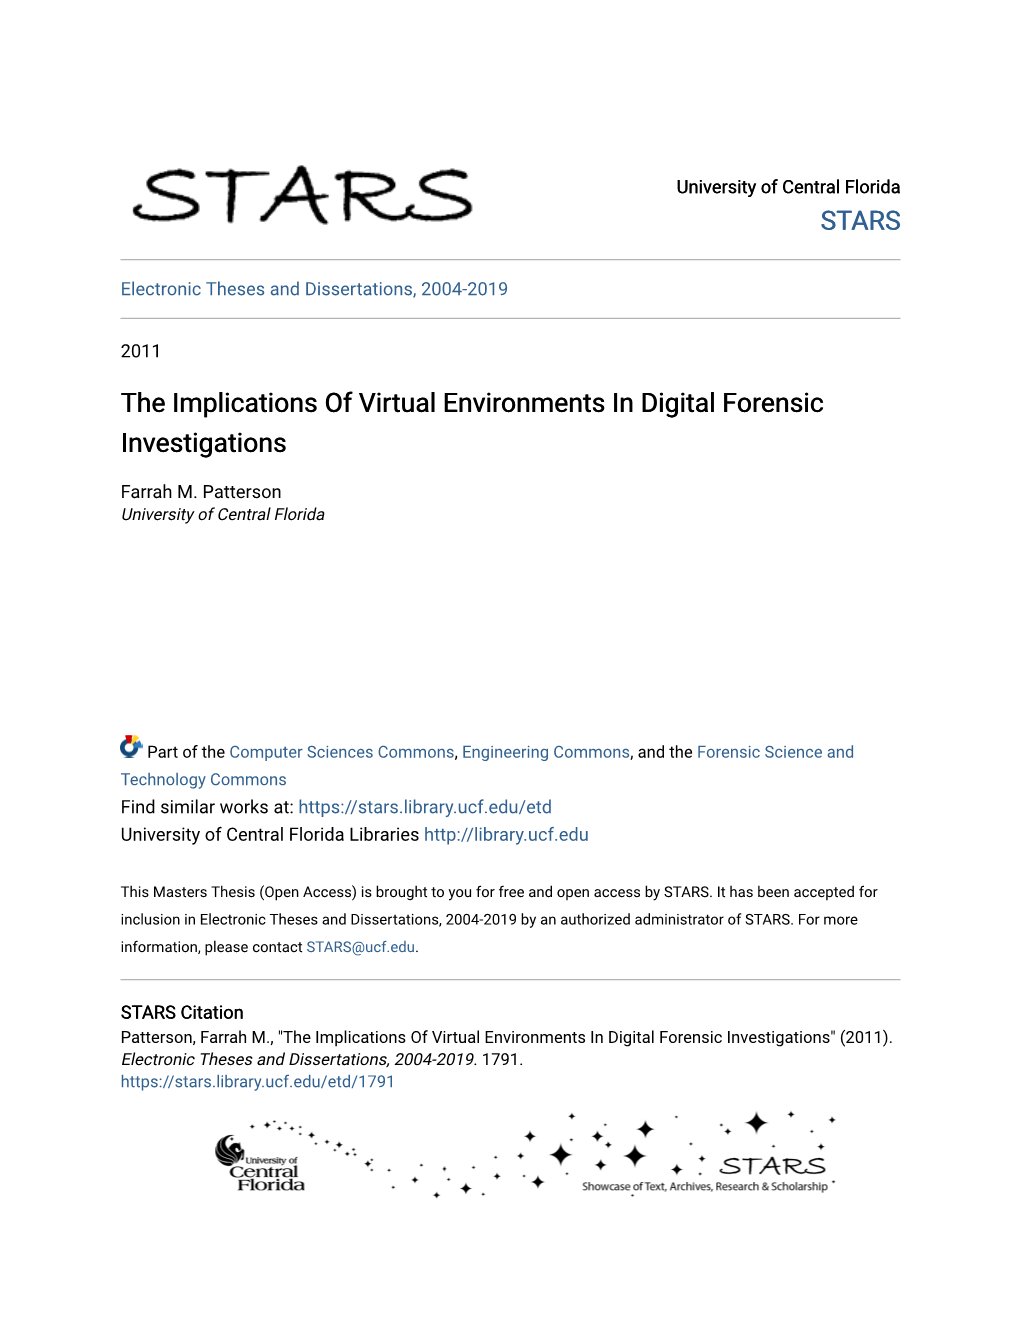 The Implications of Virtual Environments in Digital Forensic Investigations